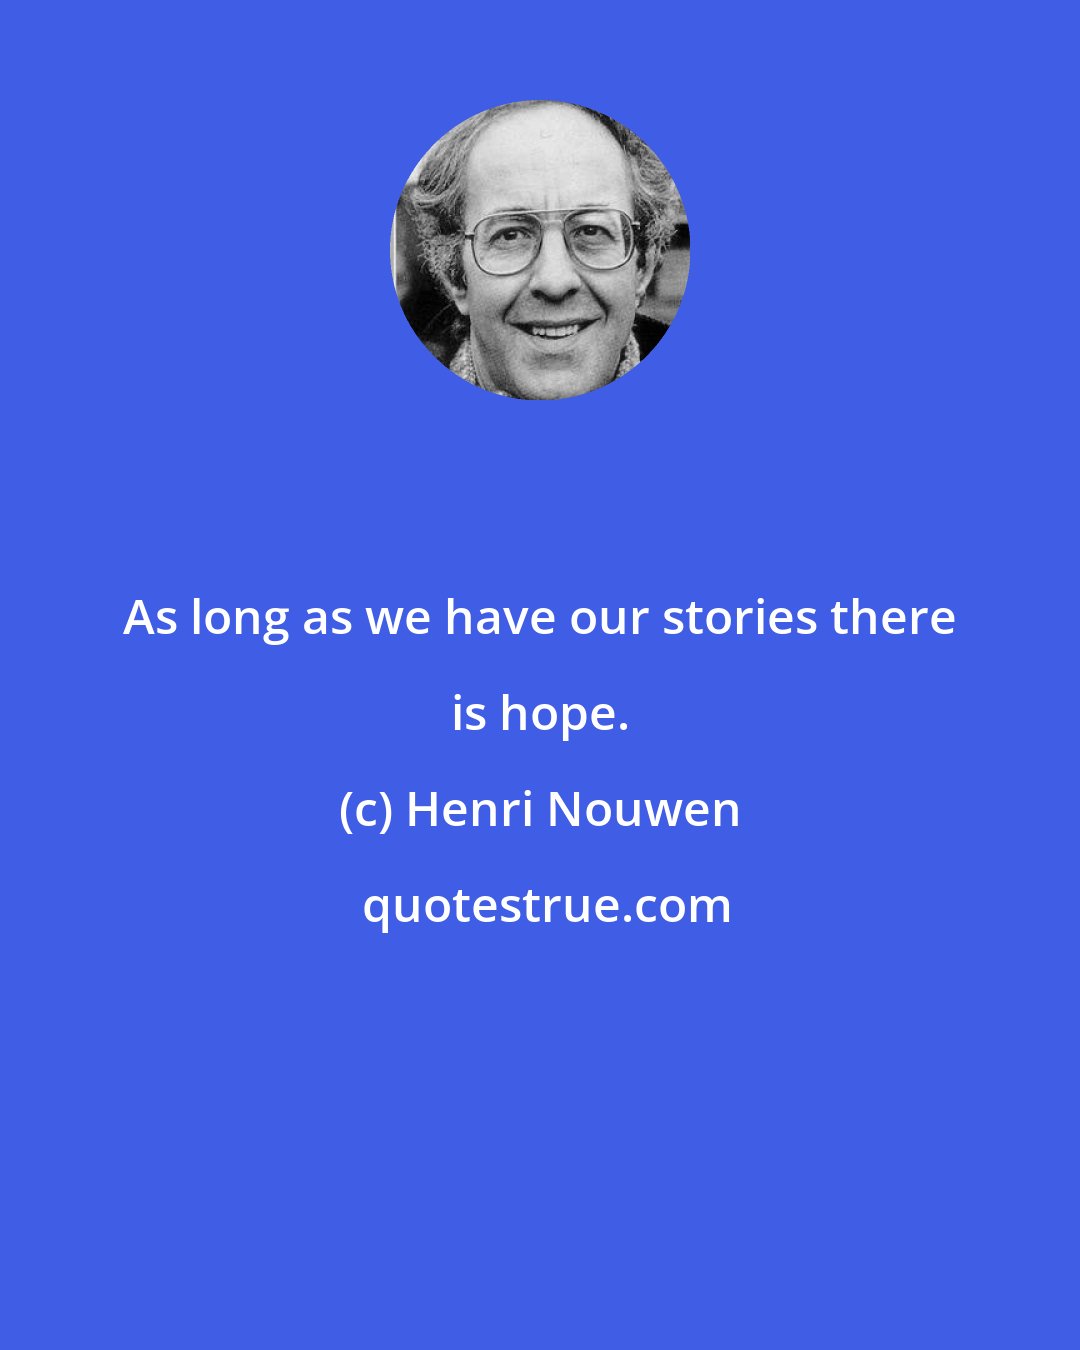 Henri Nouwen: As long as we have our stories there is hope.